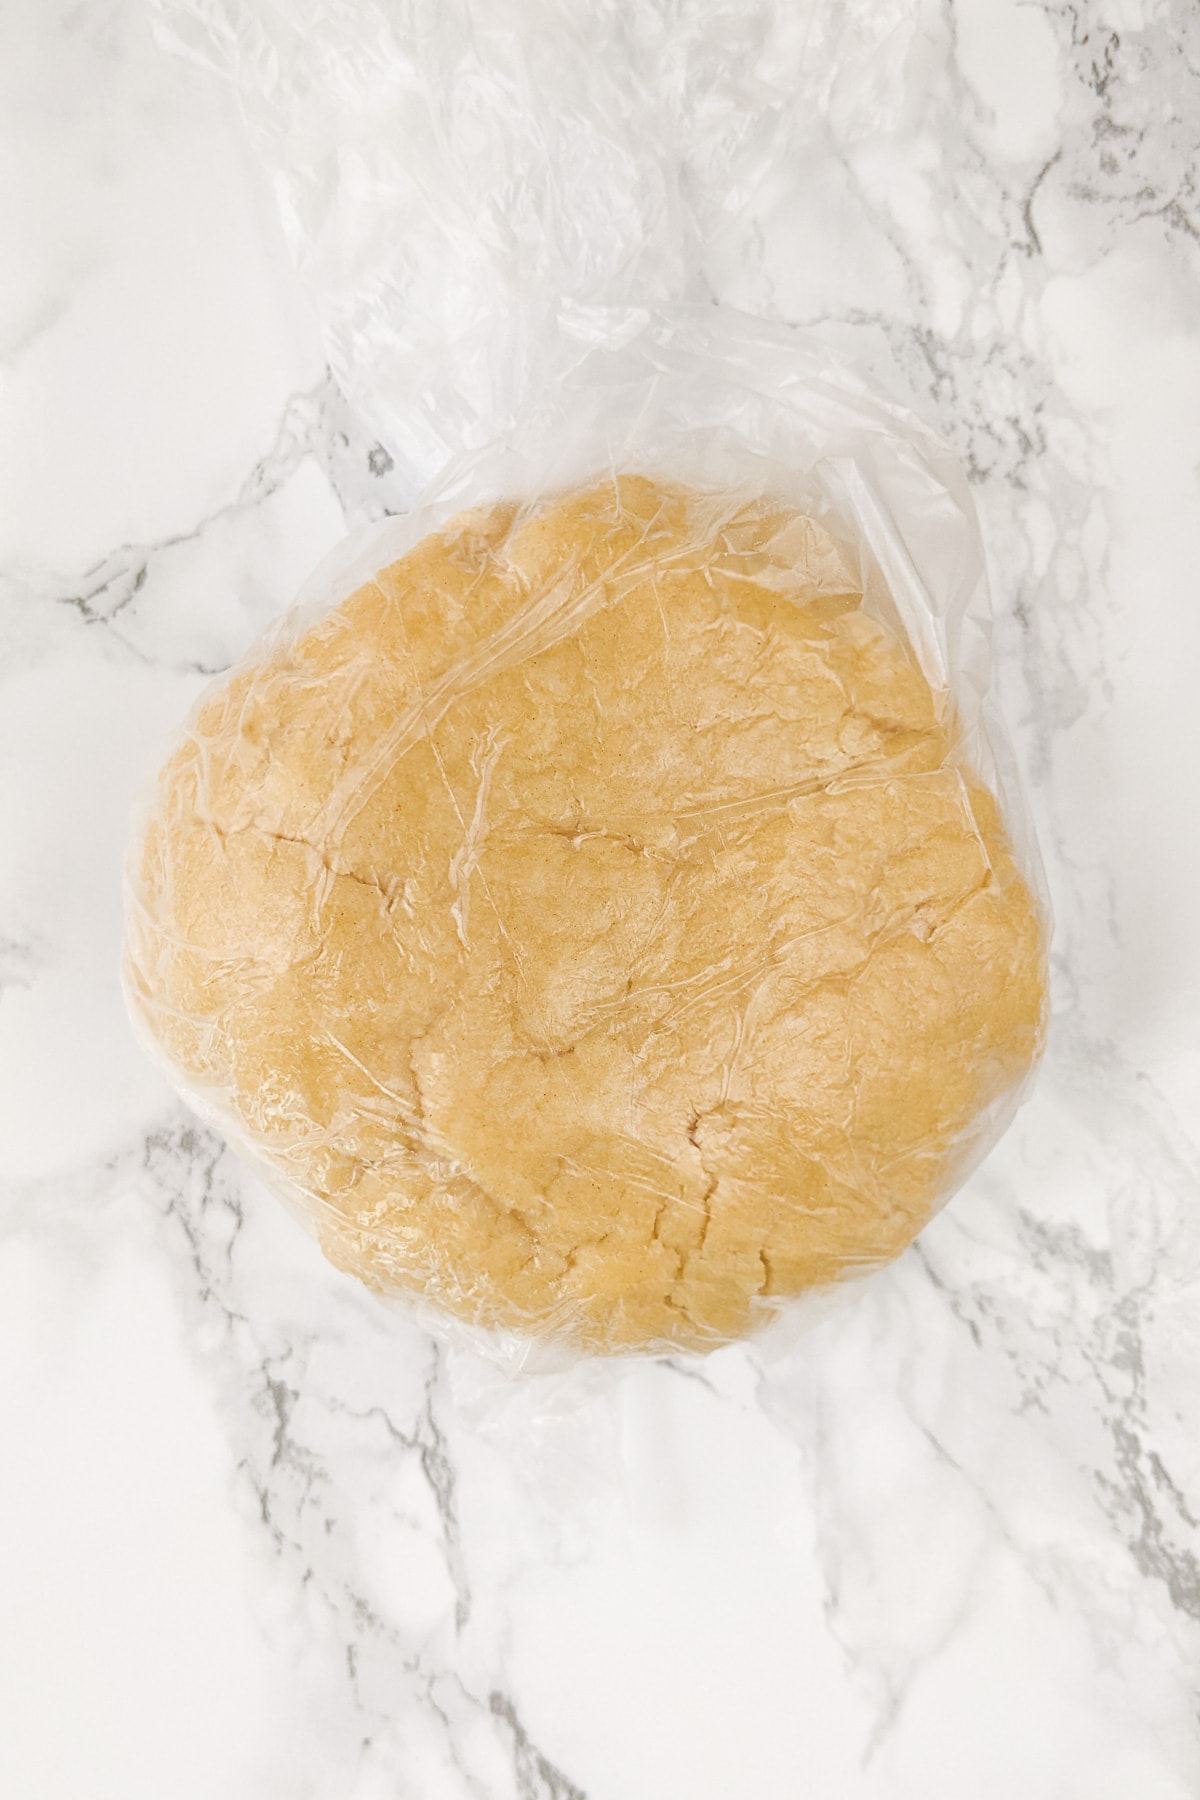 Biscuits dough in a plastic package on a marble table.